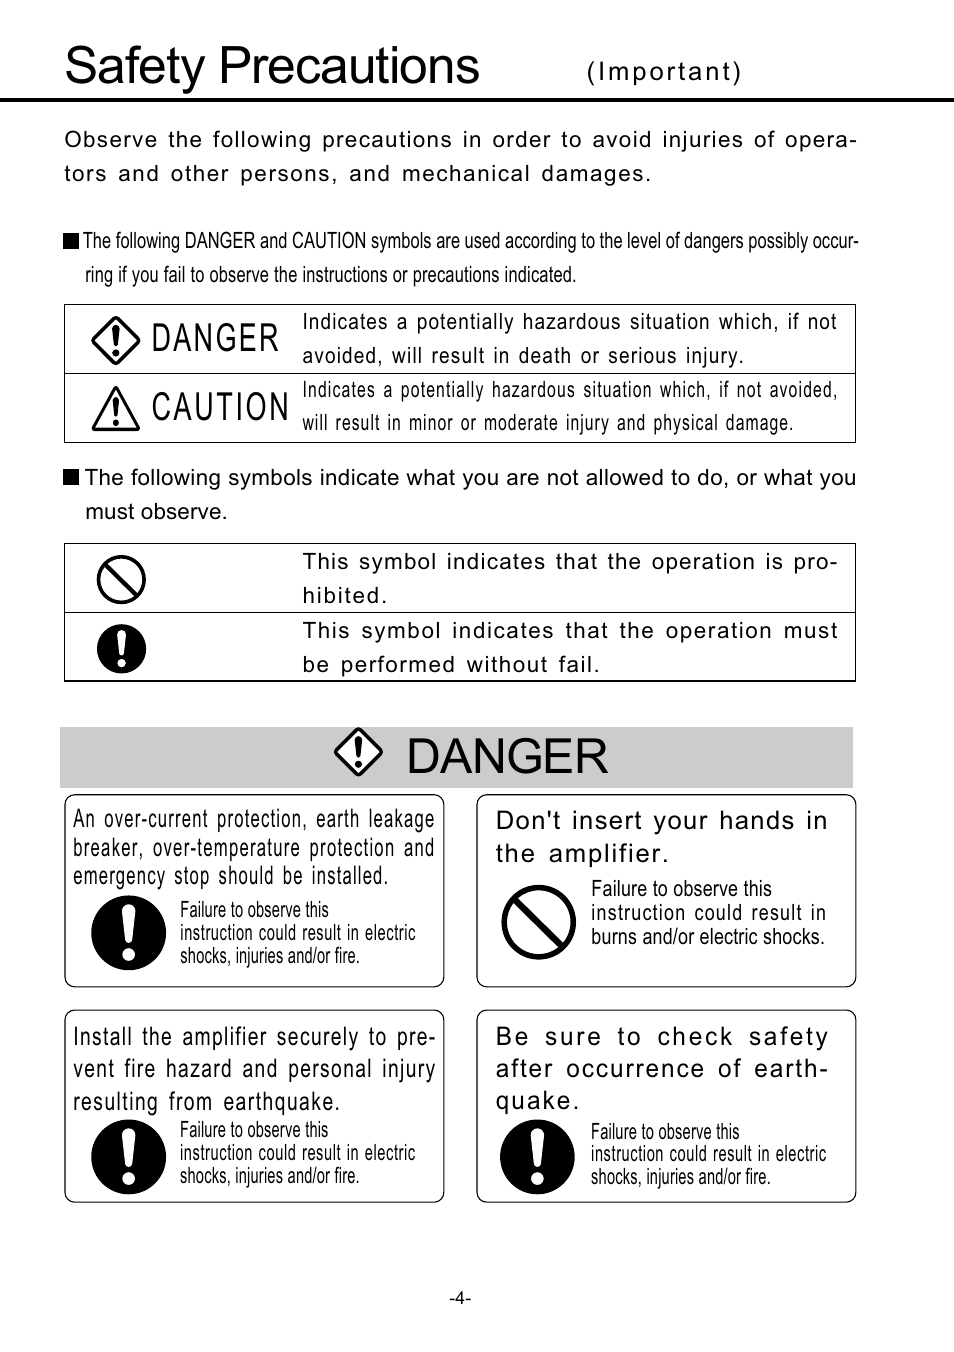 Safety precautions, Safety precautions ••••• 4, Danger | Danger caution | Panasonic MDDDT5540 User Manual | Page 4 / 133